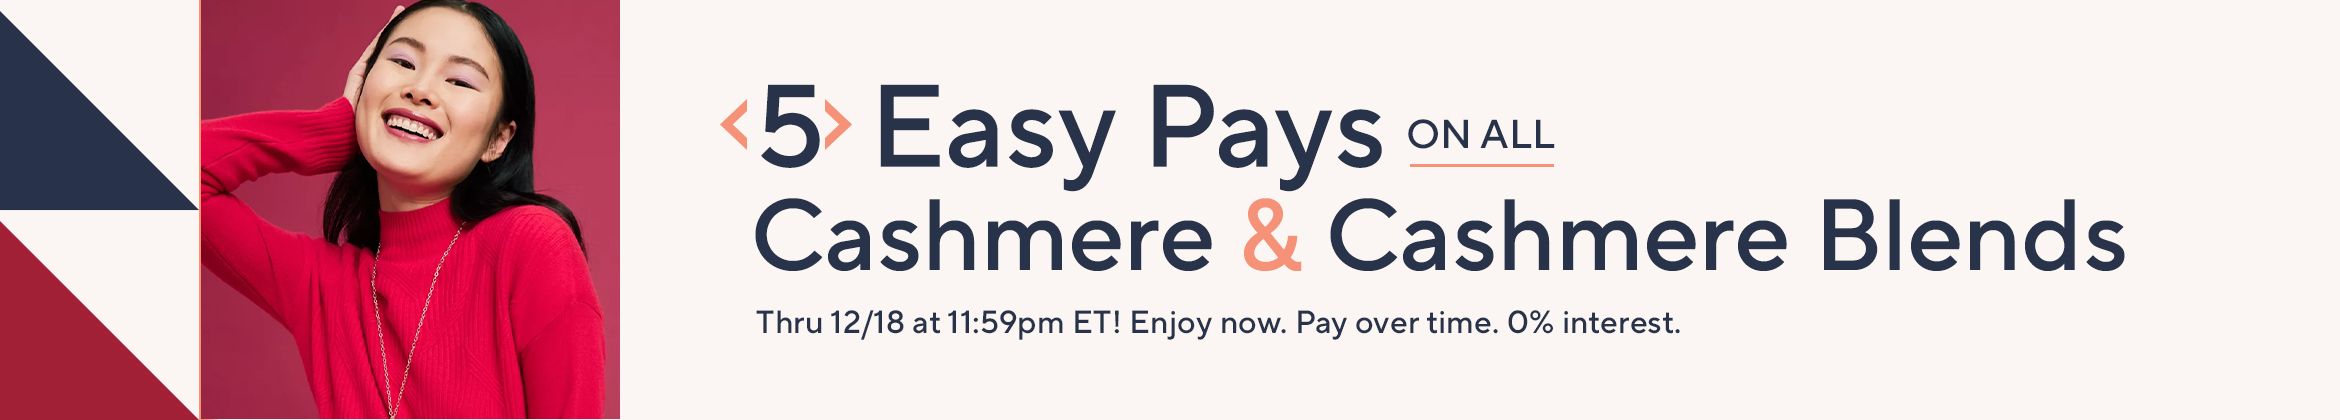 5 Easy Pays on All Cashmere & Cashmere Blends Thru 12/18 at 11:59pm ET! Enjoy now. Pay over time. 0% interest.